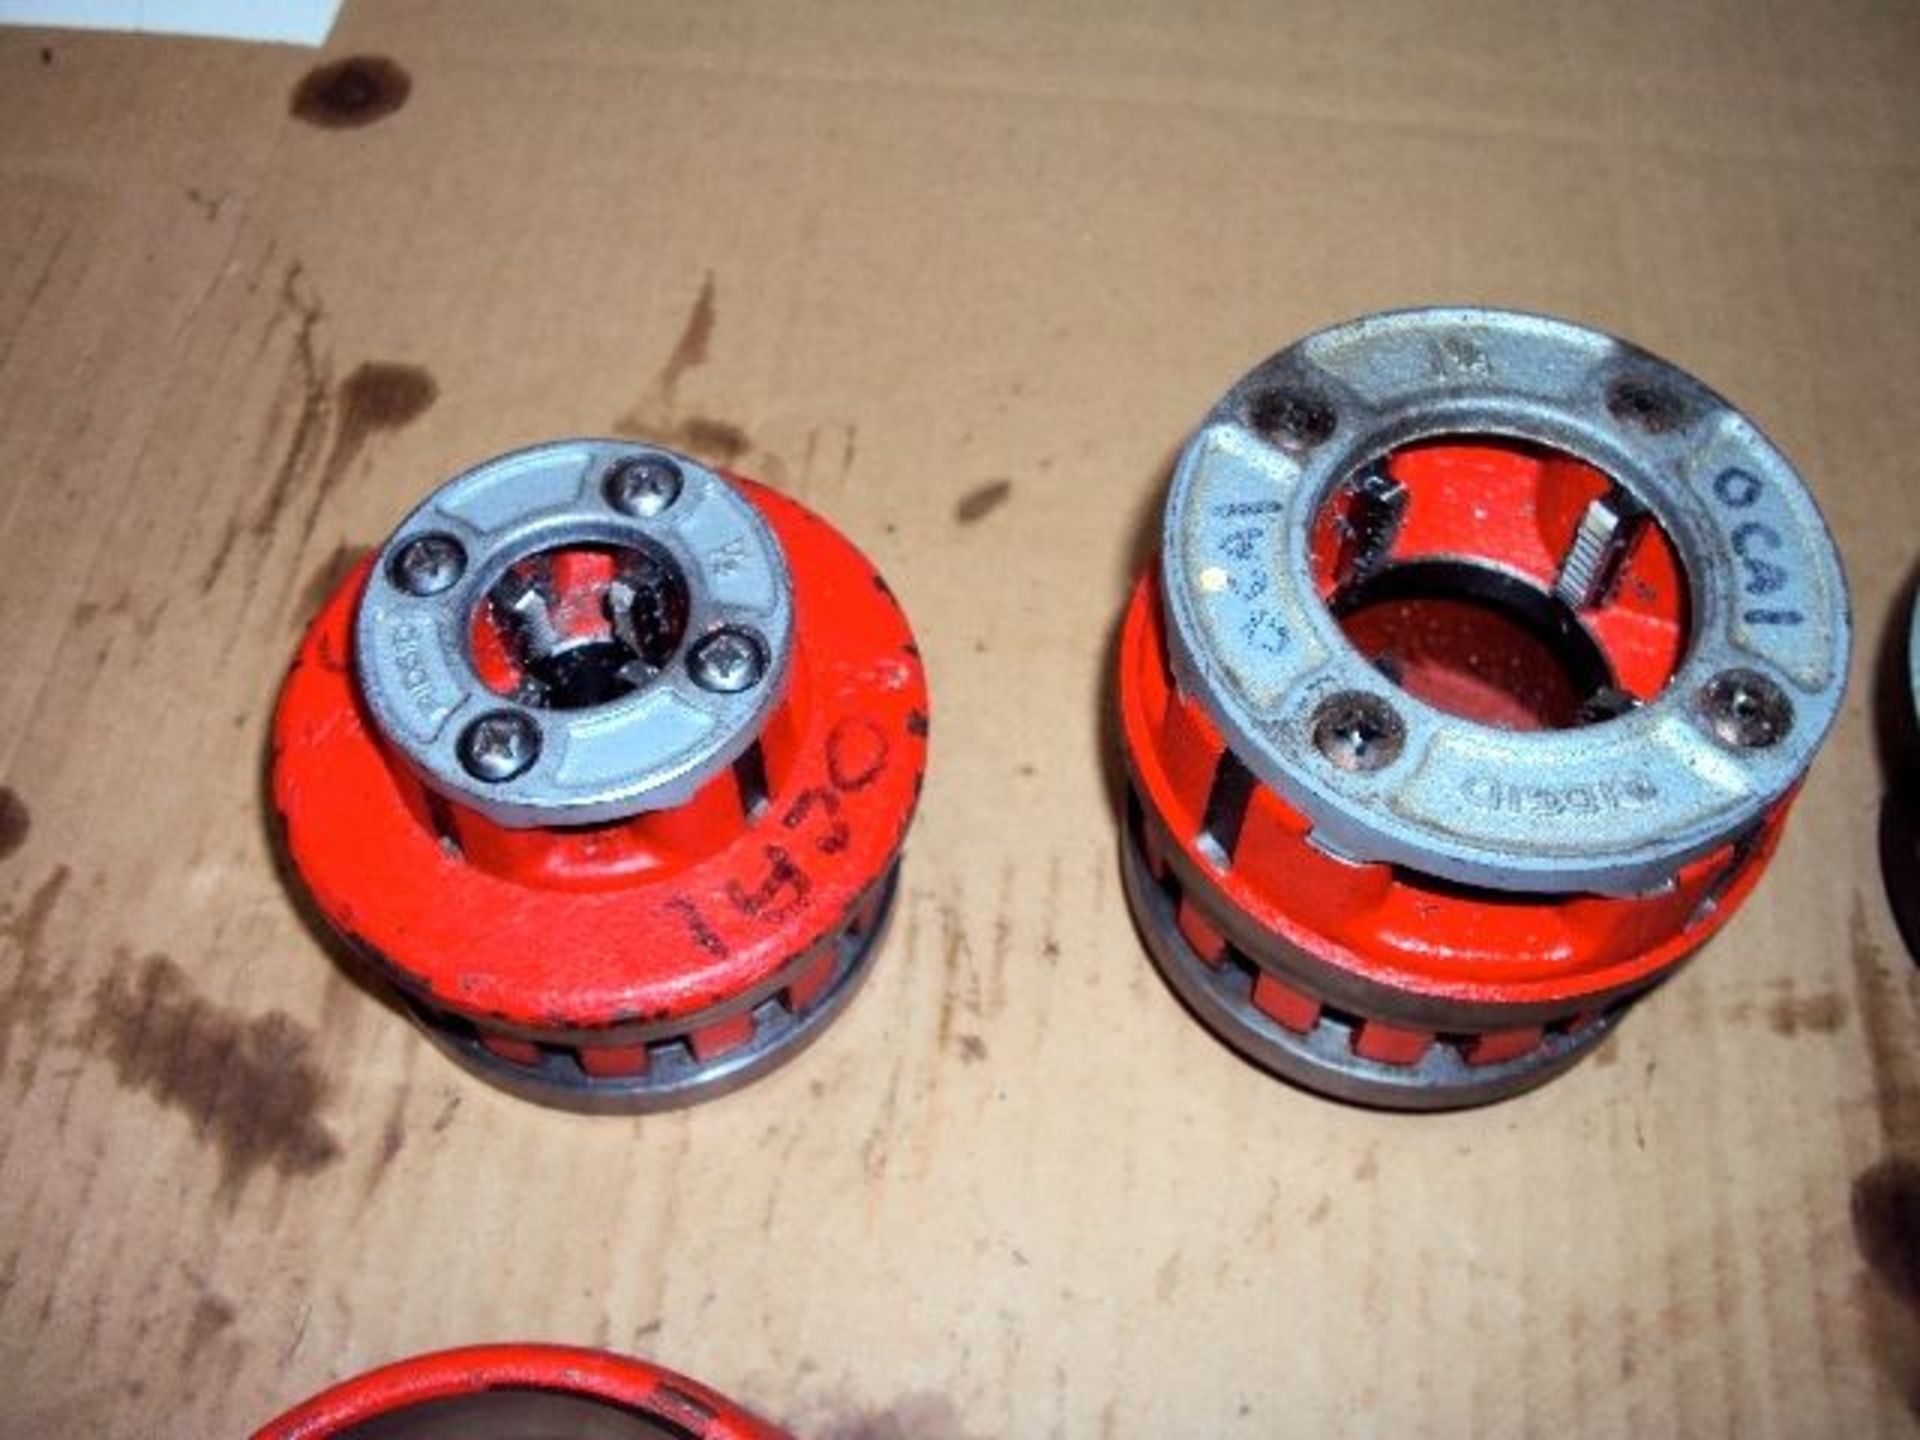 Ridgid 12R Manual Pipe Threader with (4) Dies 2”, 1-1/2”, 1-1/4” & 1/2” /263 - Image 2 of 4